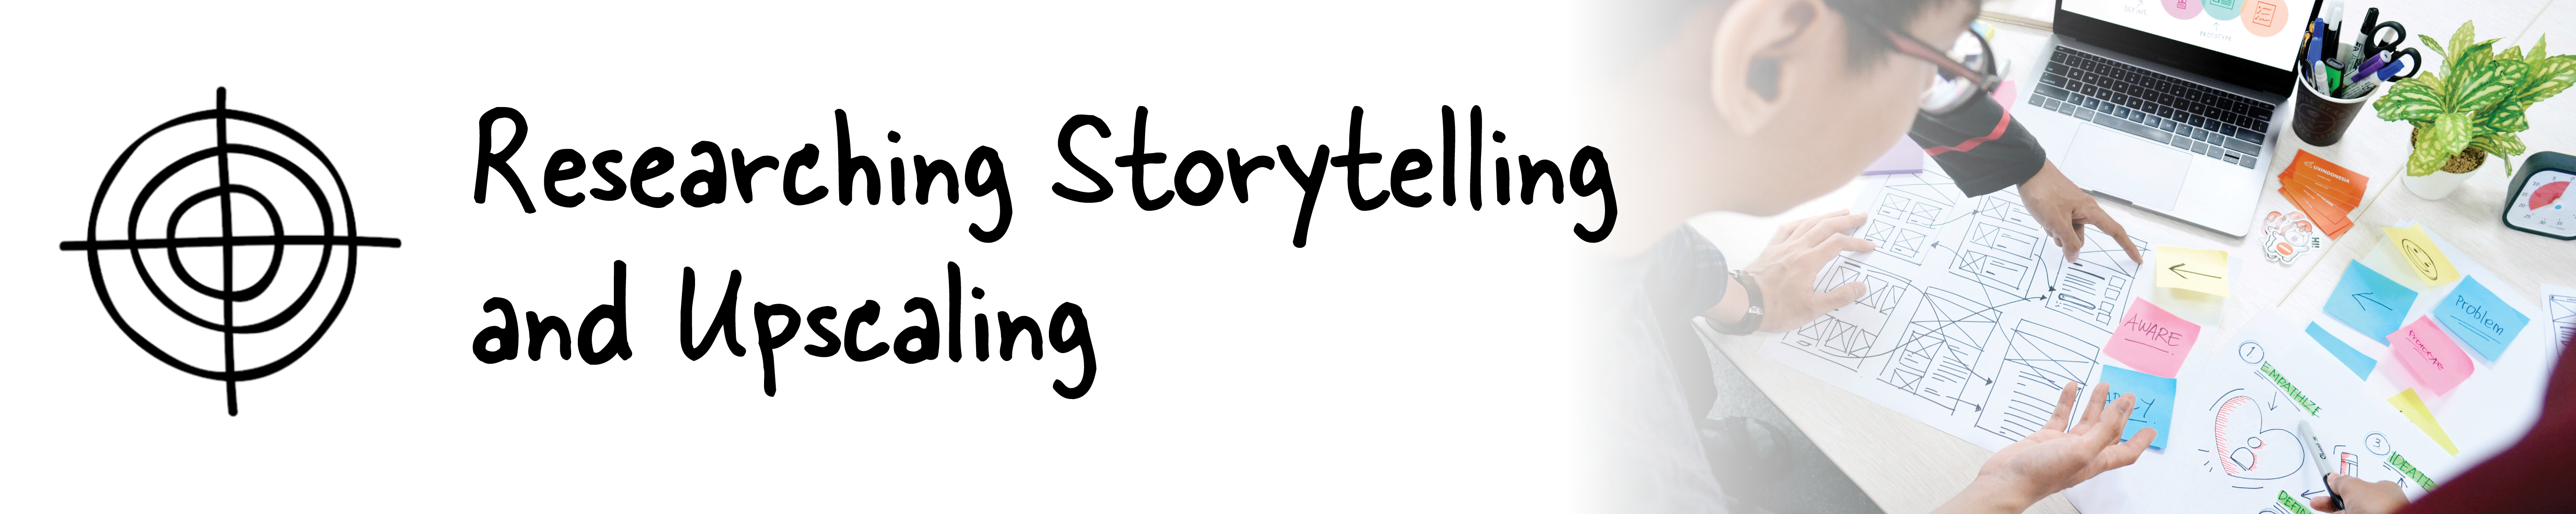 Researching Storytelling and Upscaling